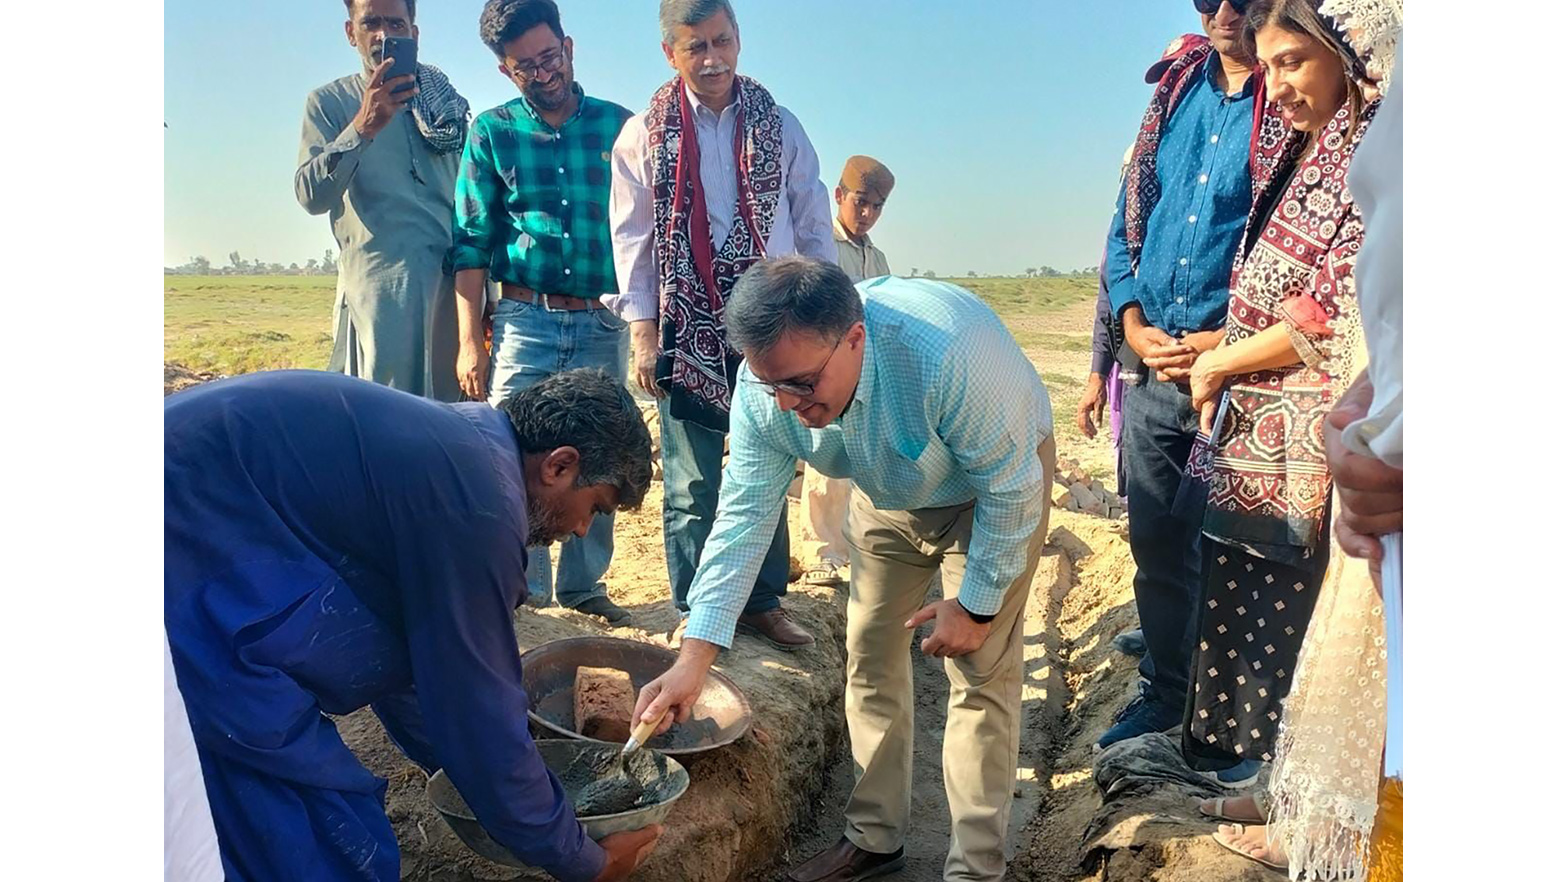 Ahmed Zaheer, country chairman and general manager of Chevron Pakistan, lays clay on the foundation of a new home as locals who lost their possessions during historic flooding stand by.